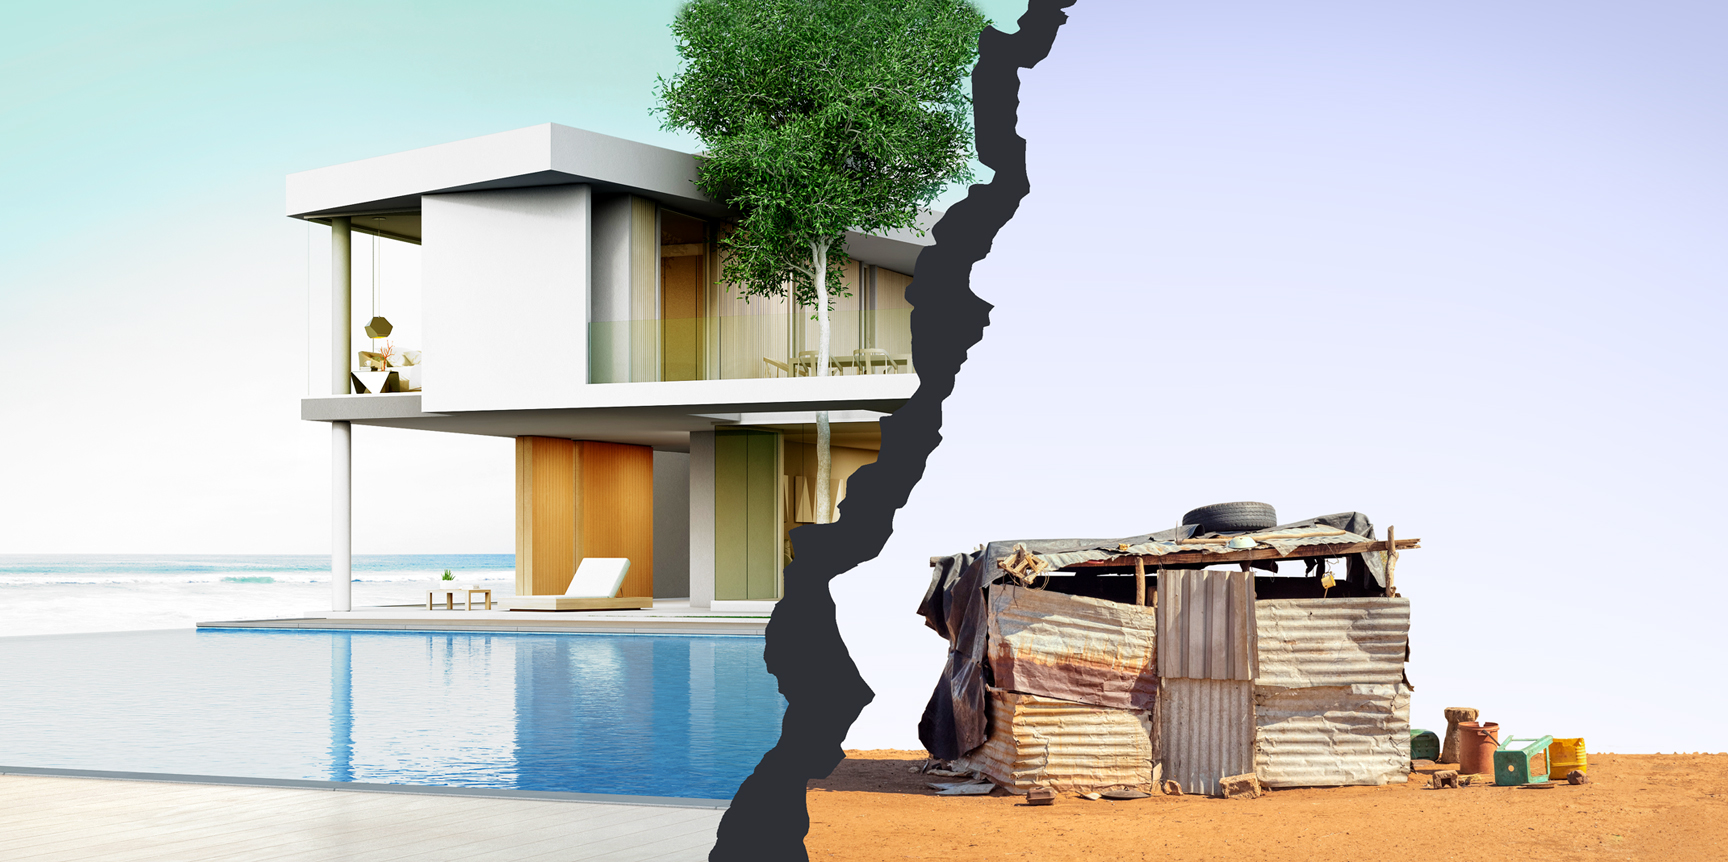 Comparison of the housing conditions of the poor and the rich: On the left side one can see a luxurious villa with a pool, on the right a corrugated iron hut.